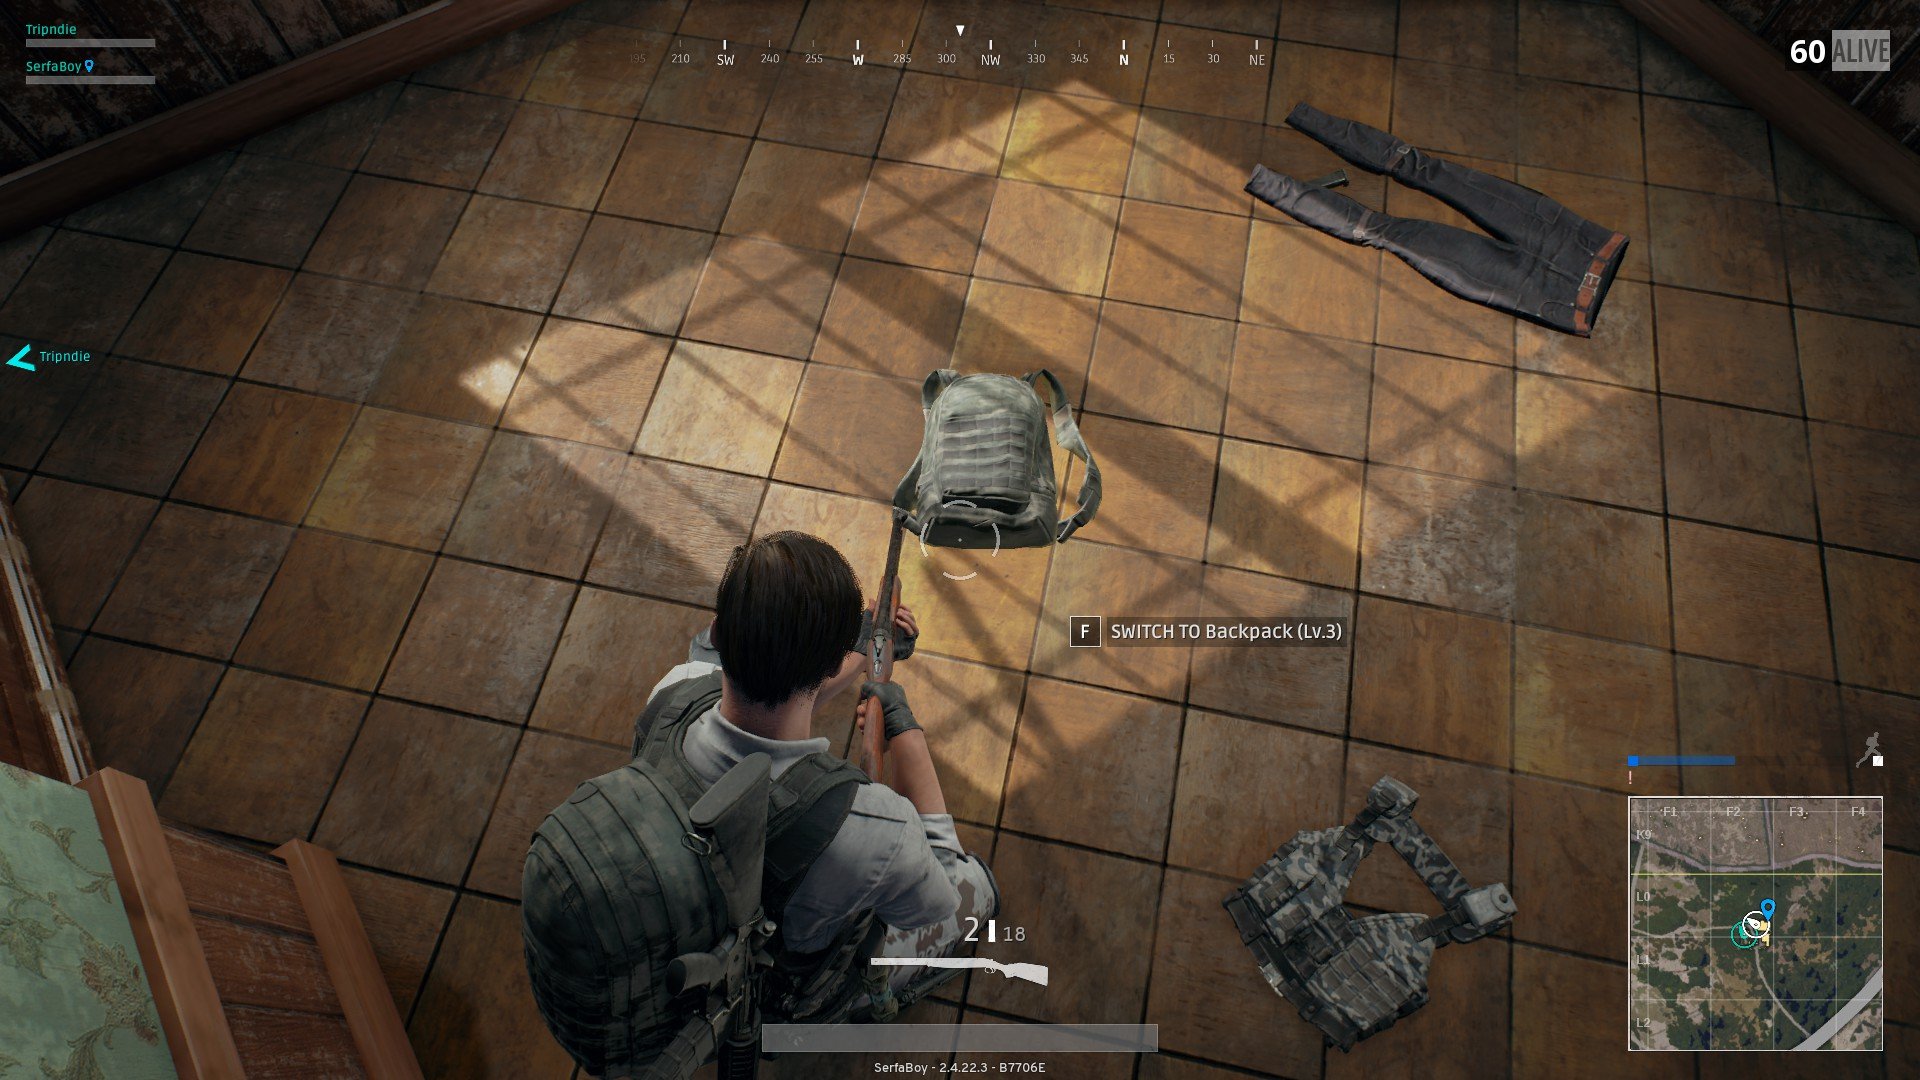 PUBG Level 3 Backpack In Game